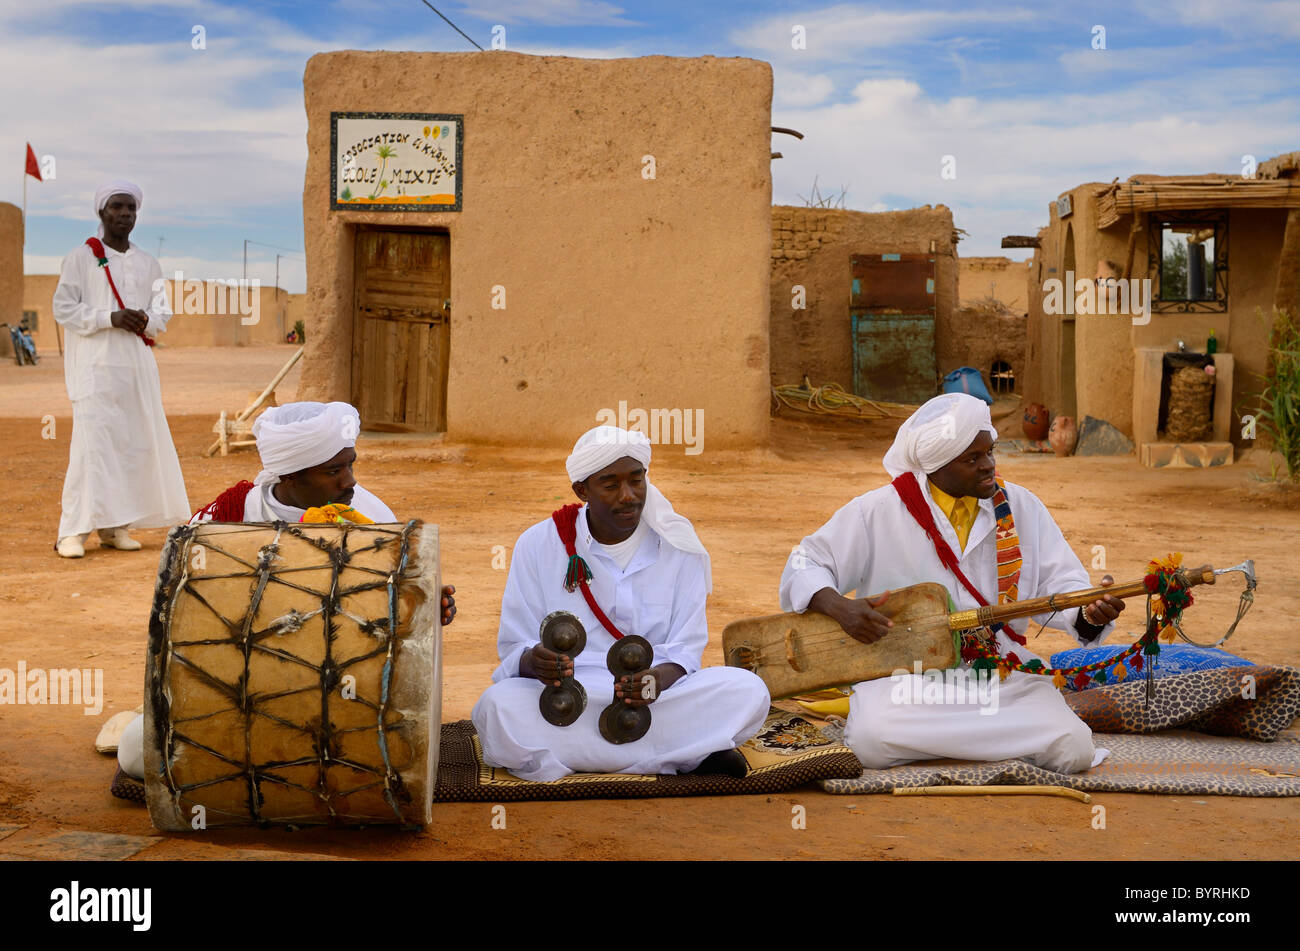 Gnawa music group in white turbans and jellabas sitting and playing music in Khemliya desert village Morocco North Africa Stock Photo